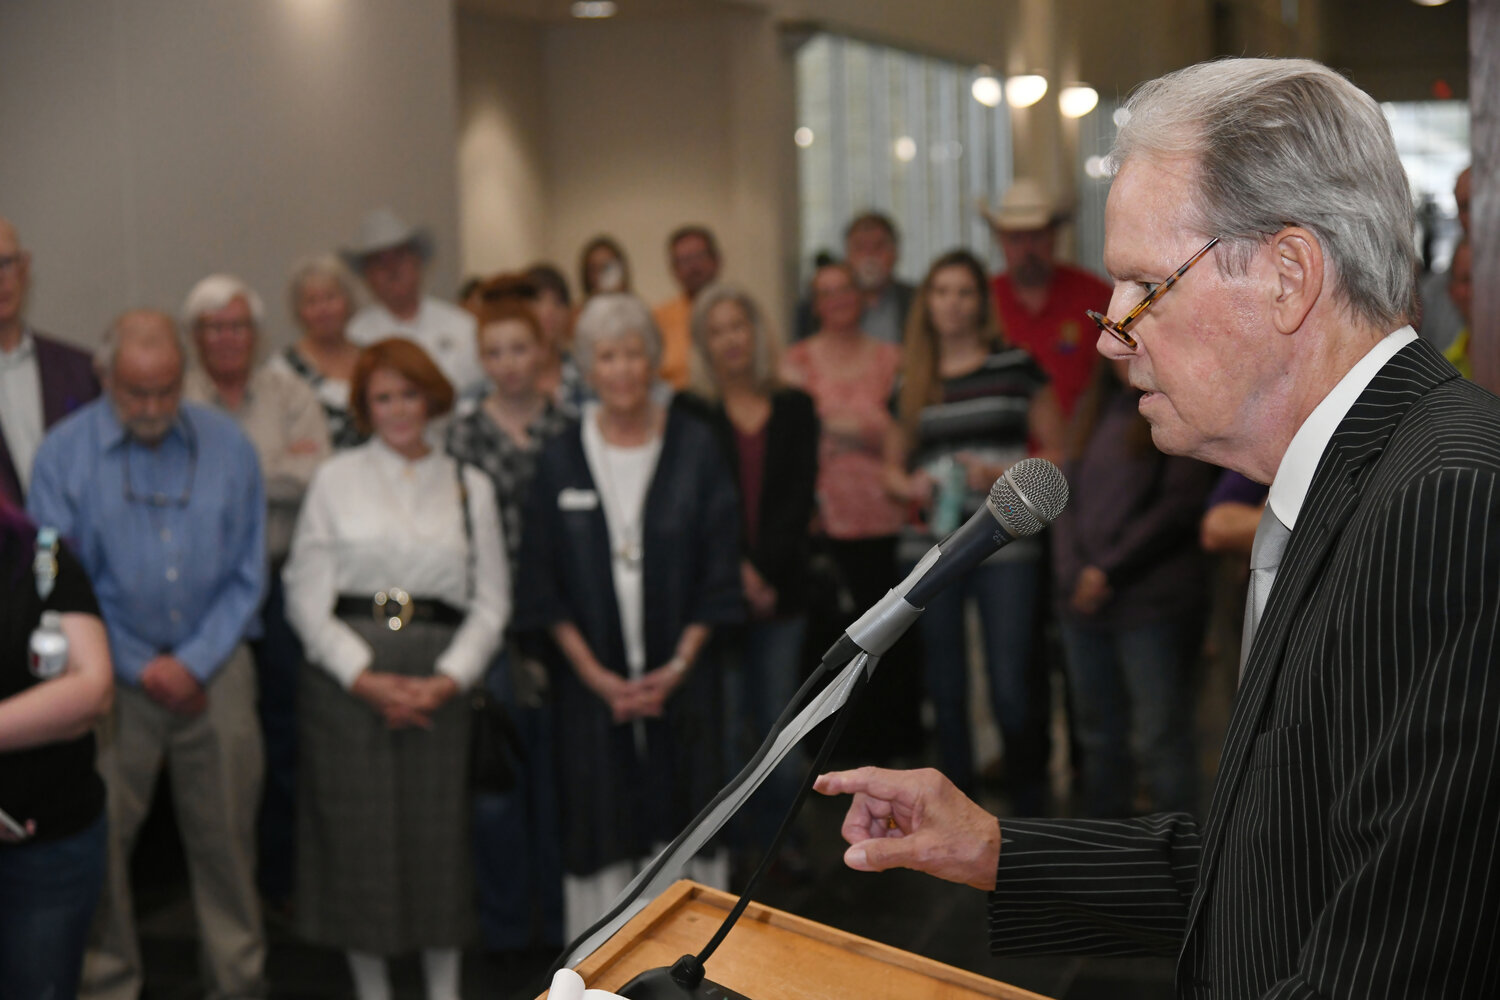 Former Hood County District Judge Ralph Walton speaks to the public during the unveiling ceremony of his portrait painted by local artist James Spurlock.